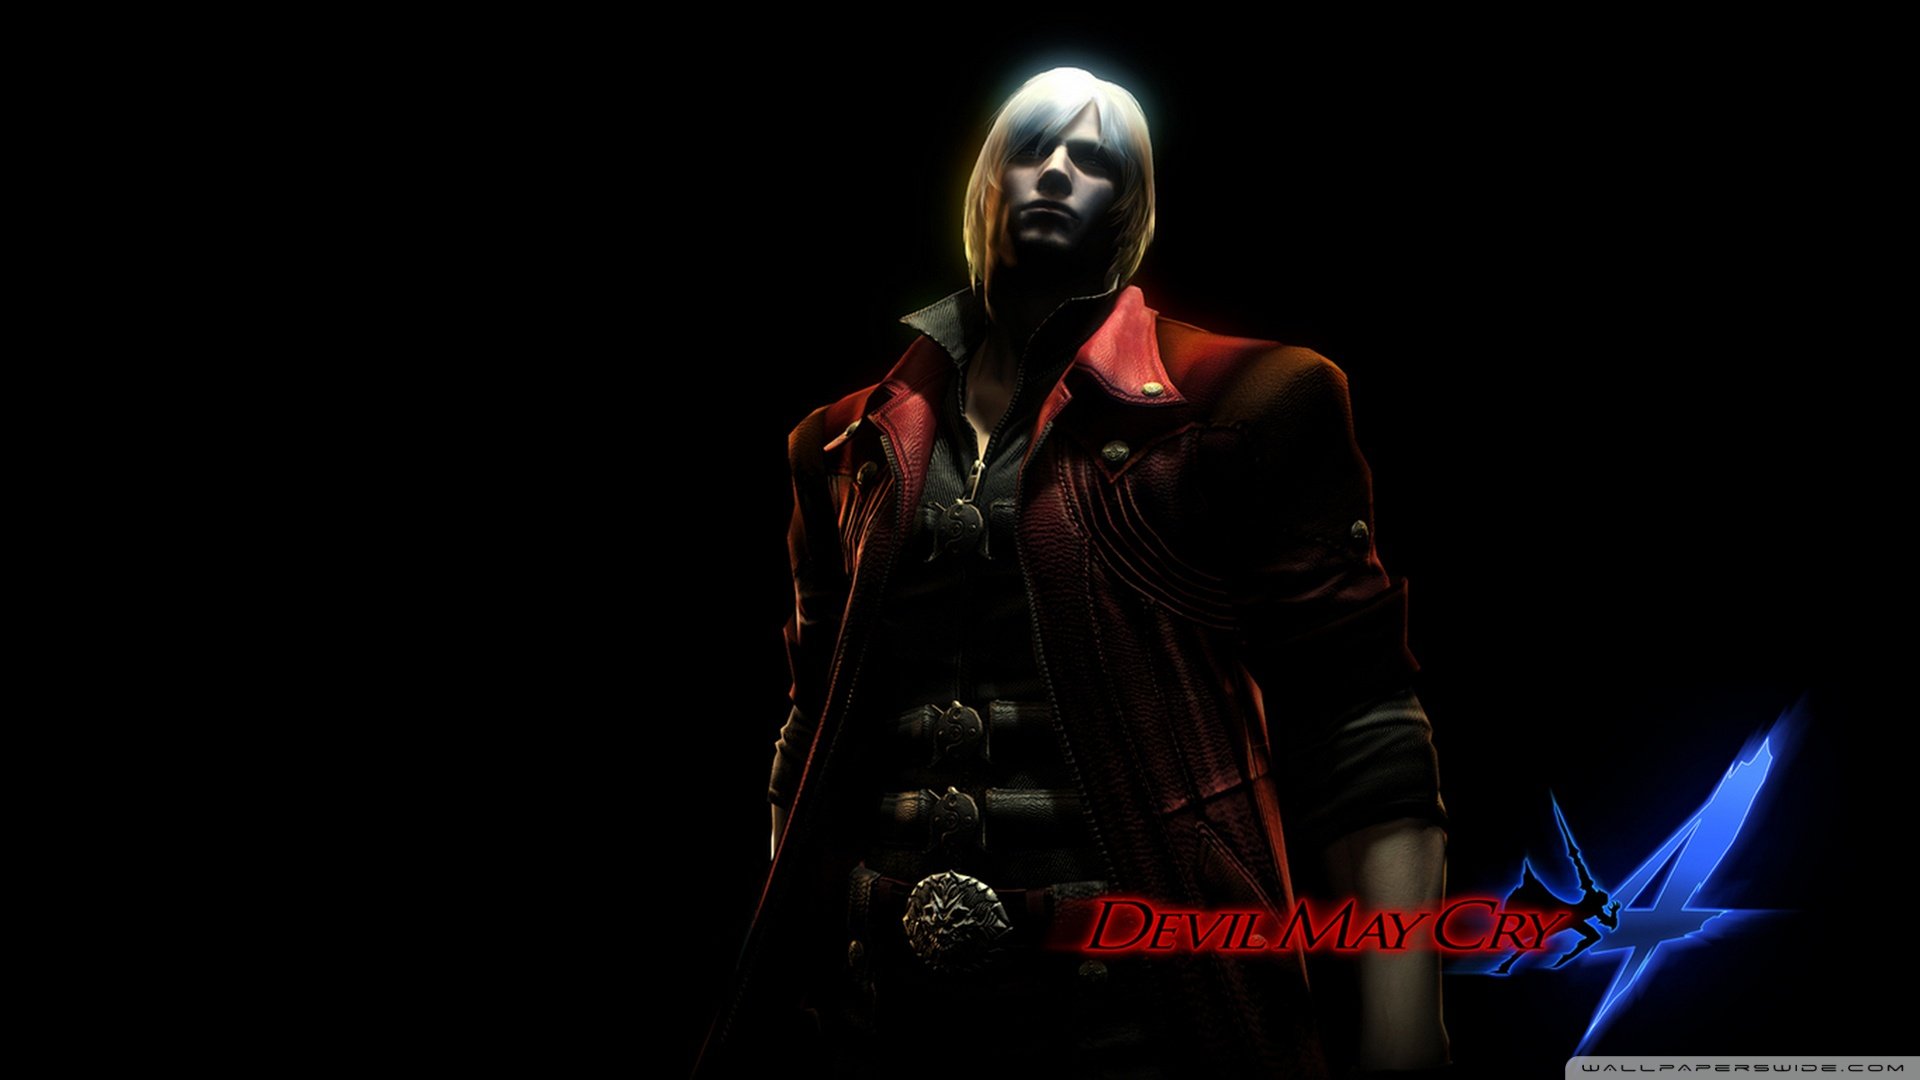 Devil May Cry 4 Dante Wallpaper 1920x1080 Devil May Cry 4